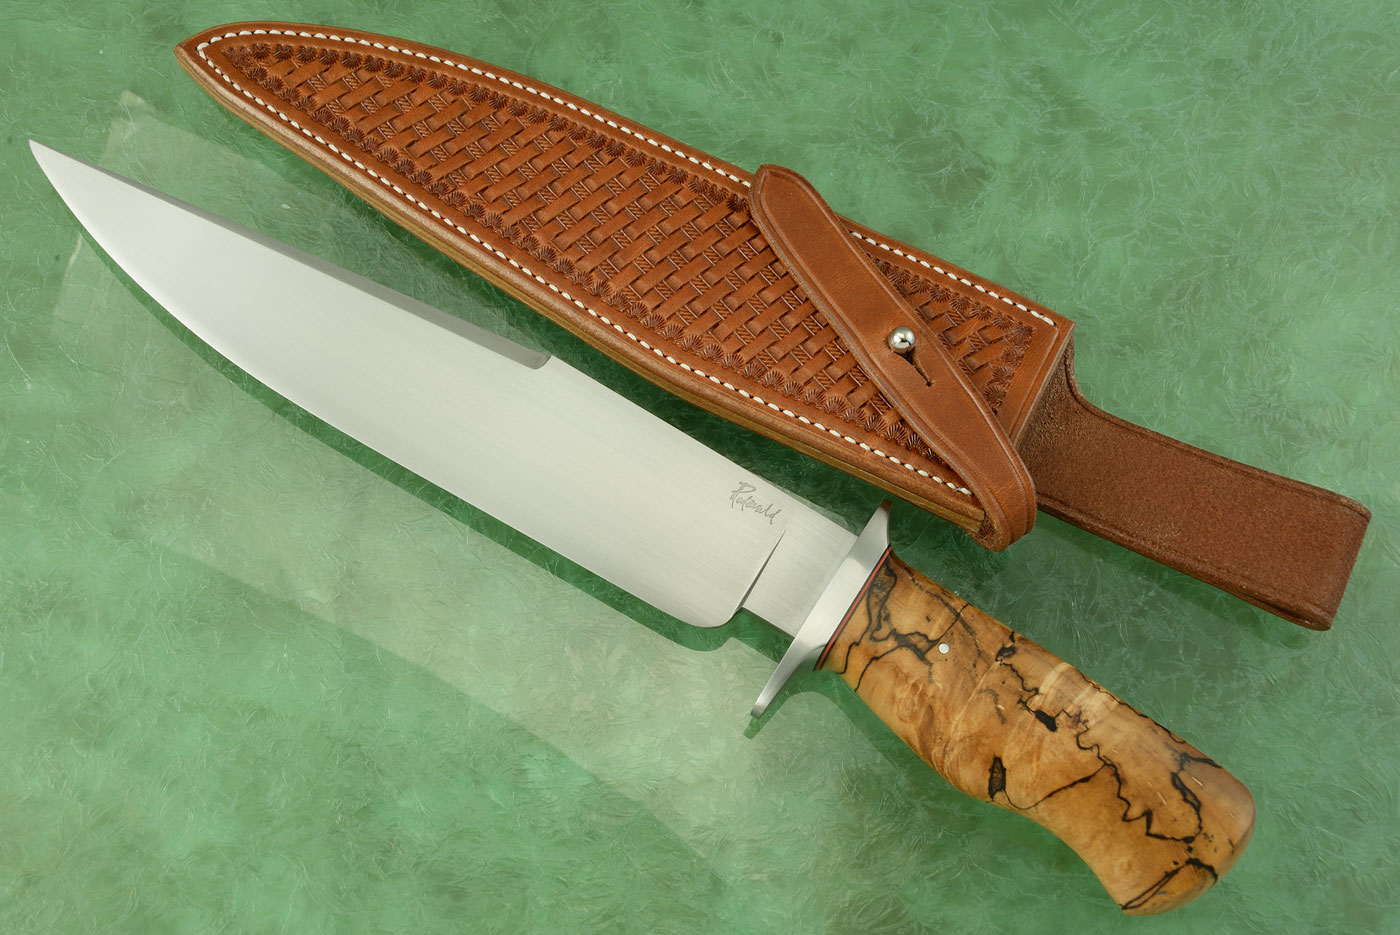 Bitterroot Camp Bowie with Spalted Maple